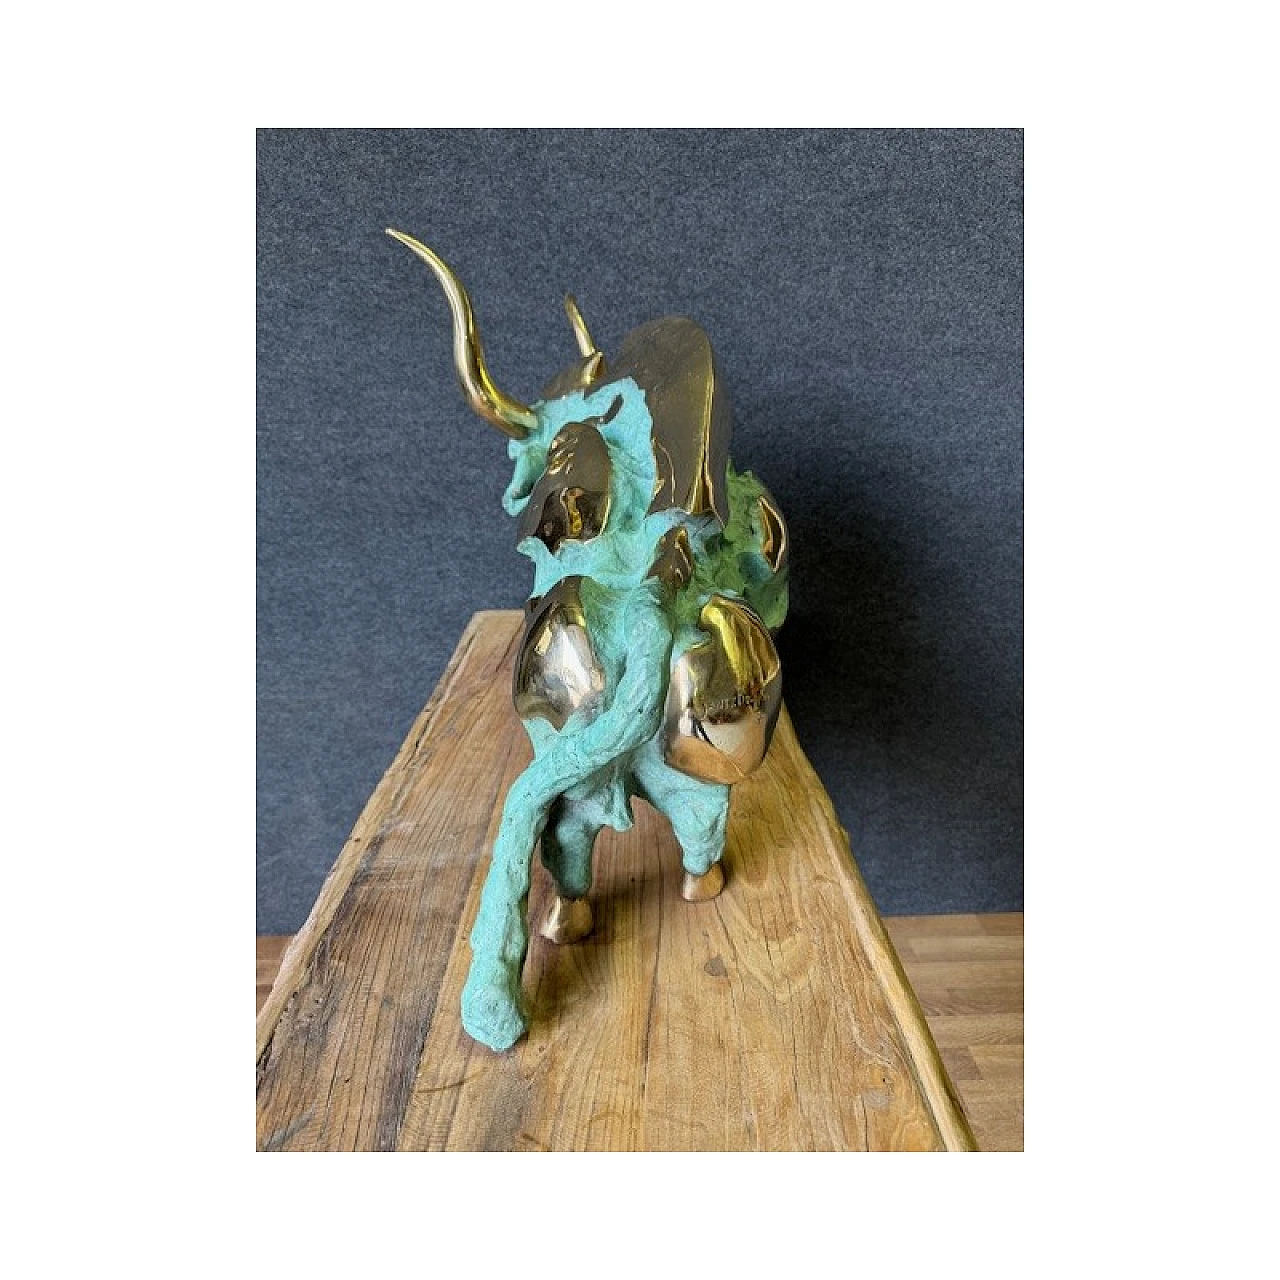 Oxidized and polished bronze bull sculpture 7